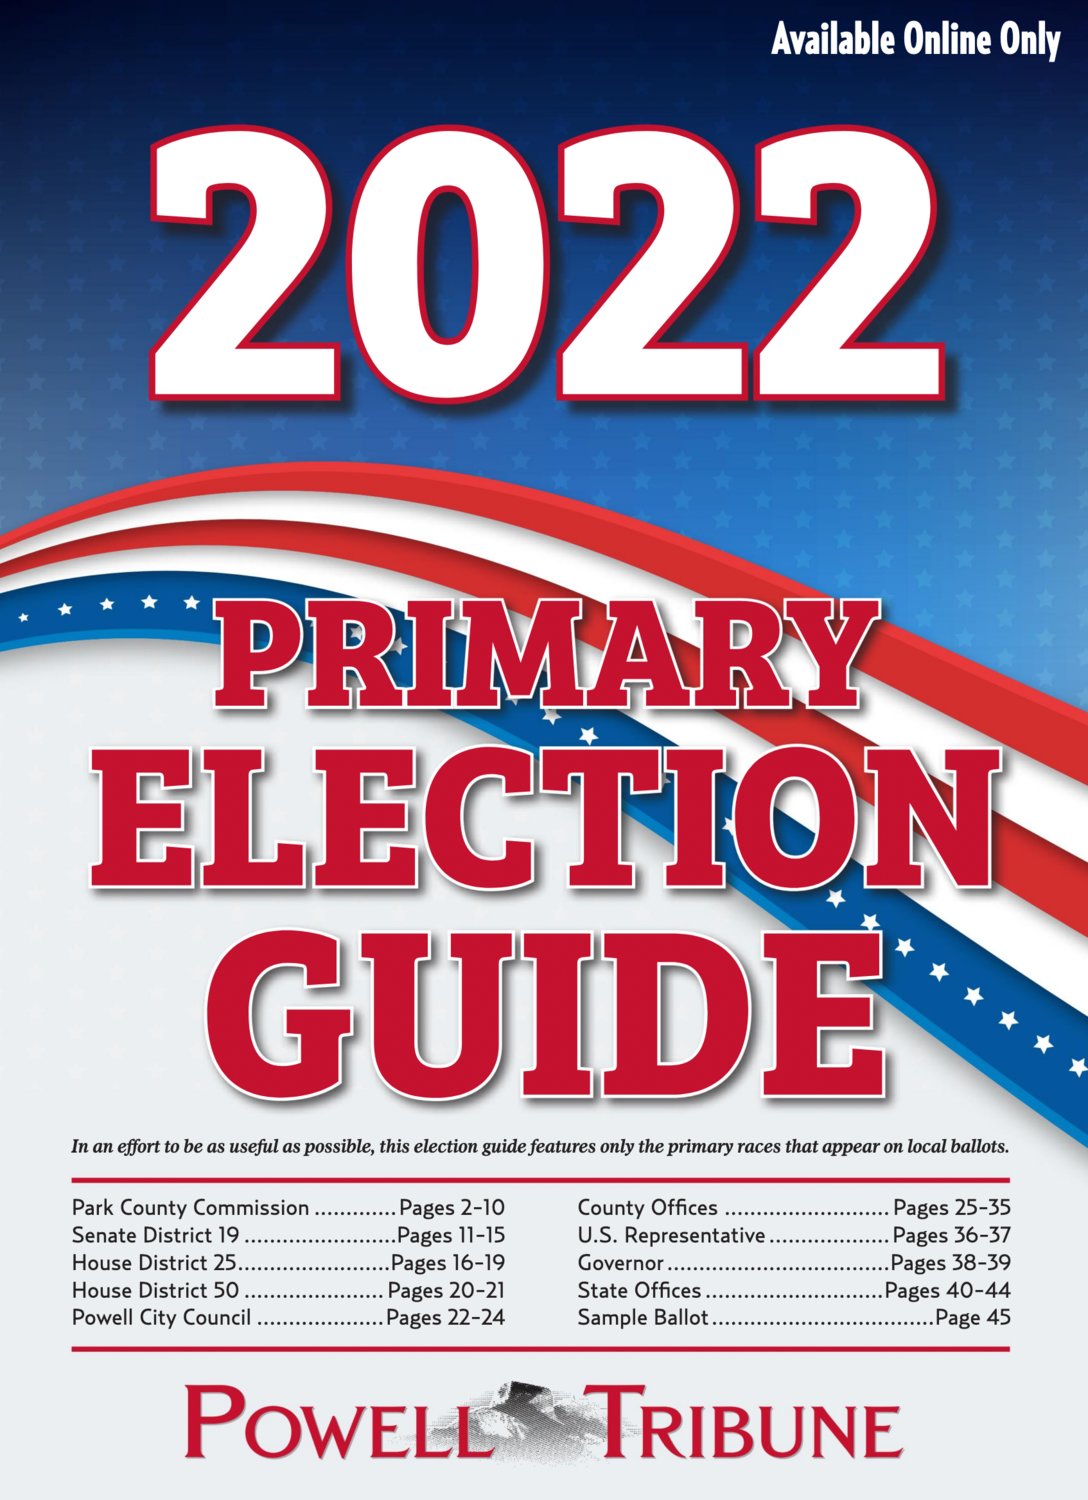 In the run-up to Wyoming’s Aug. 16 primary election, the Powell Tribune is offering an online election guide, complete with candidate profiles and a sample ballot. In its campaign guide, the Tribune does not endorse candidates. The only mission is to prepare area residents for Election Day. To view the guide, go to tinyurl.com/2022PEGuide.